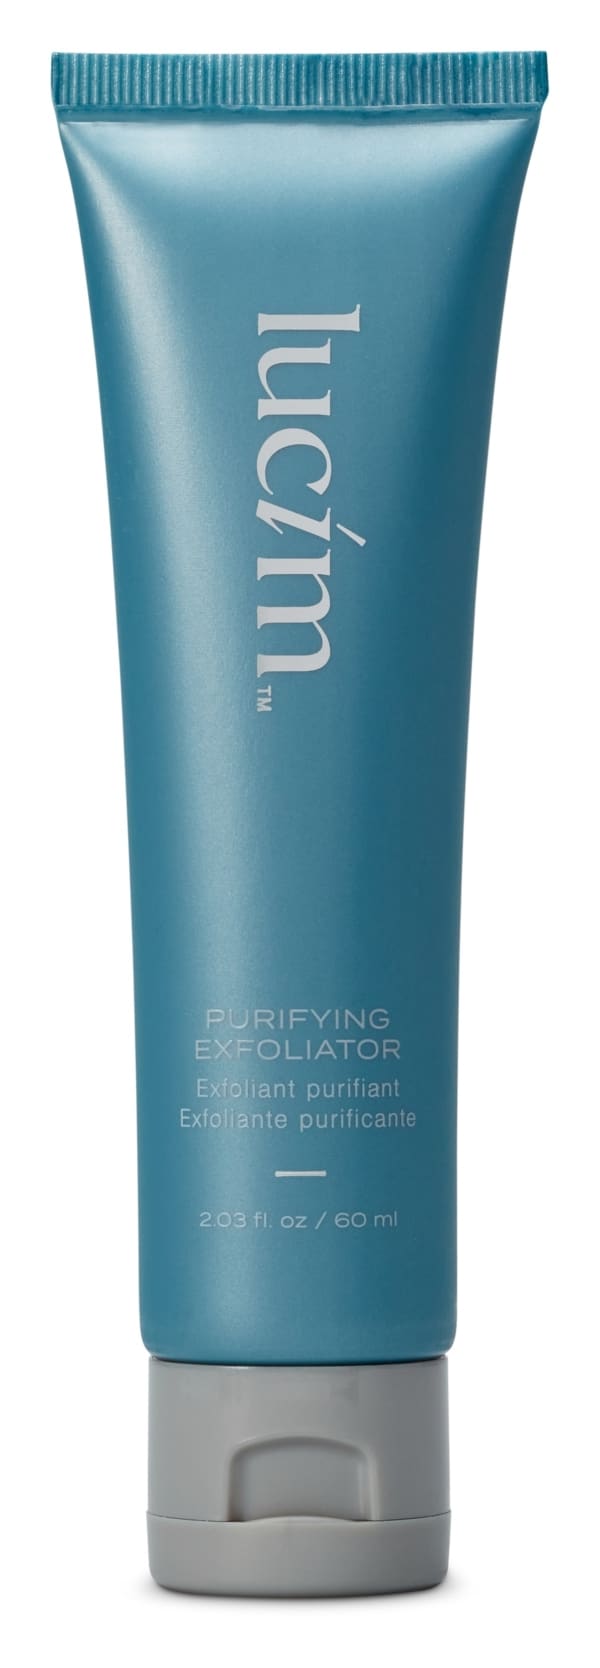 Purifying Exfoliator from Lucim